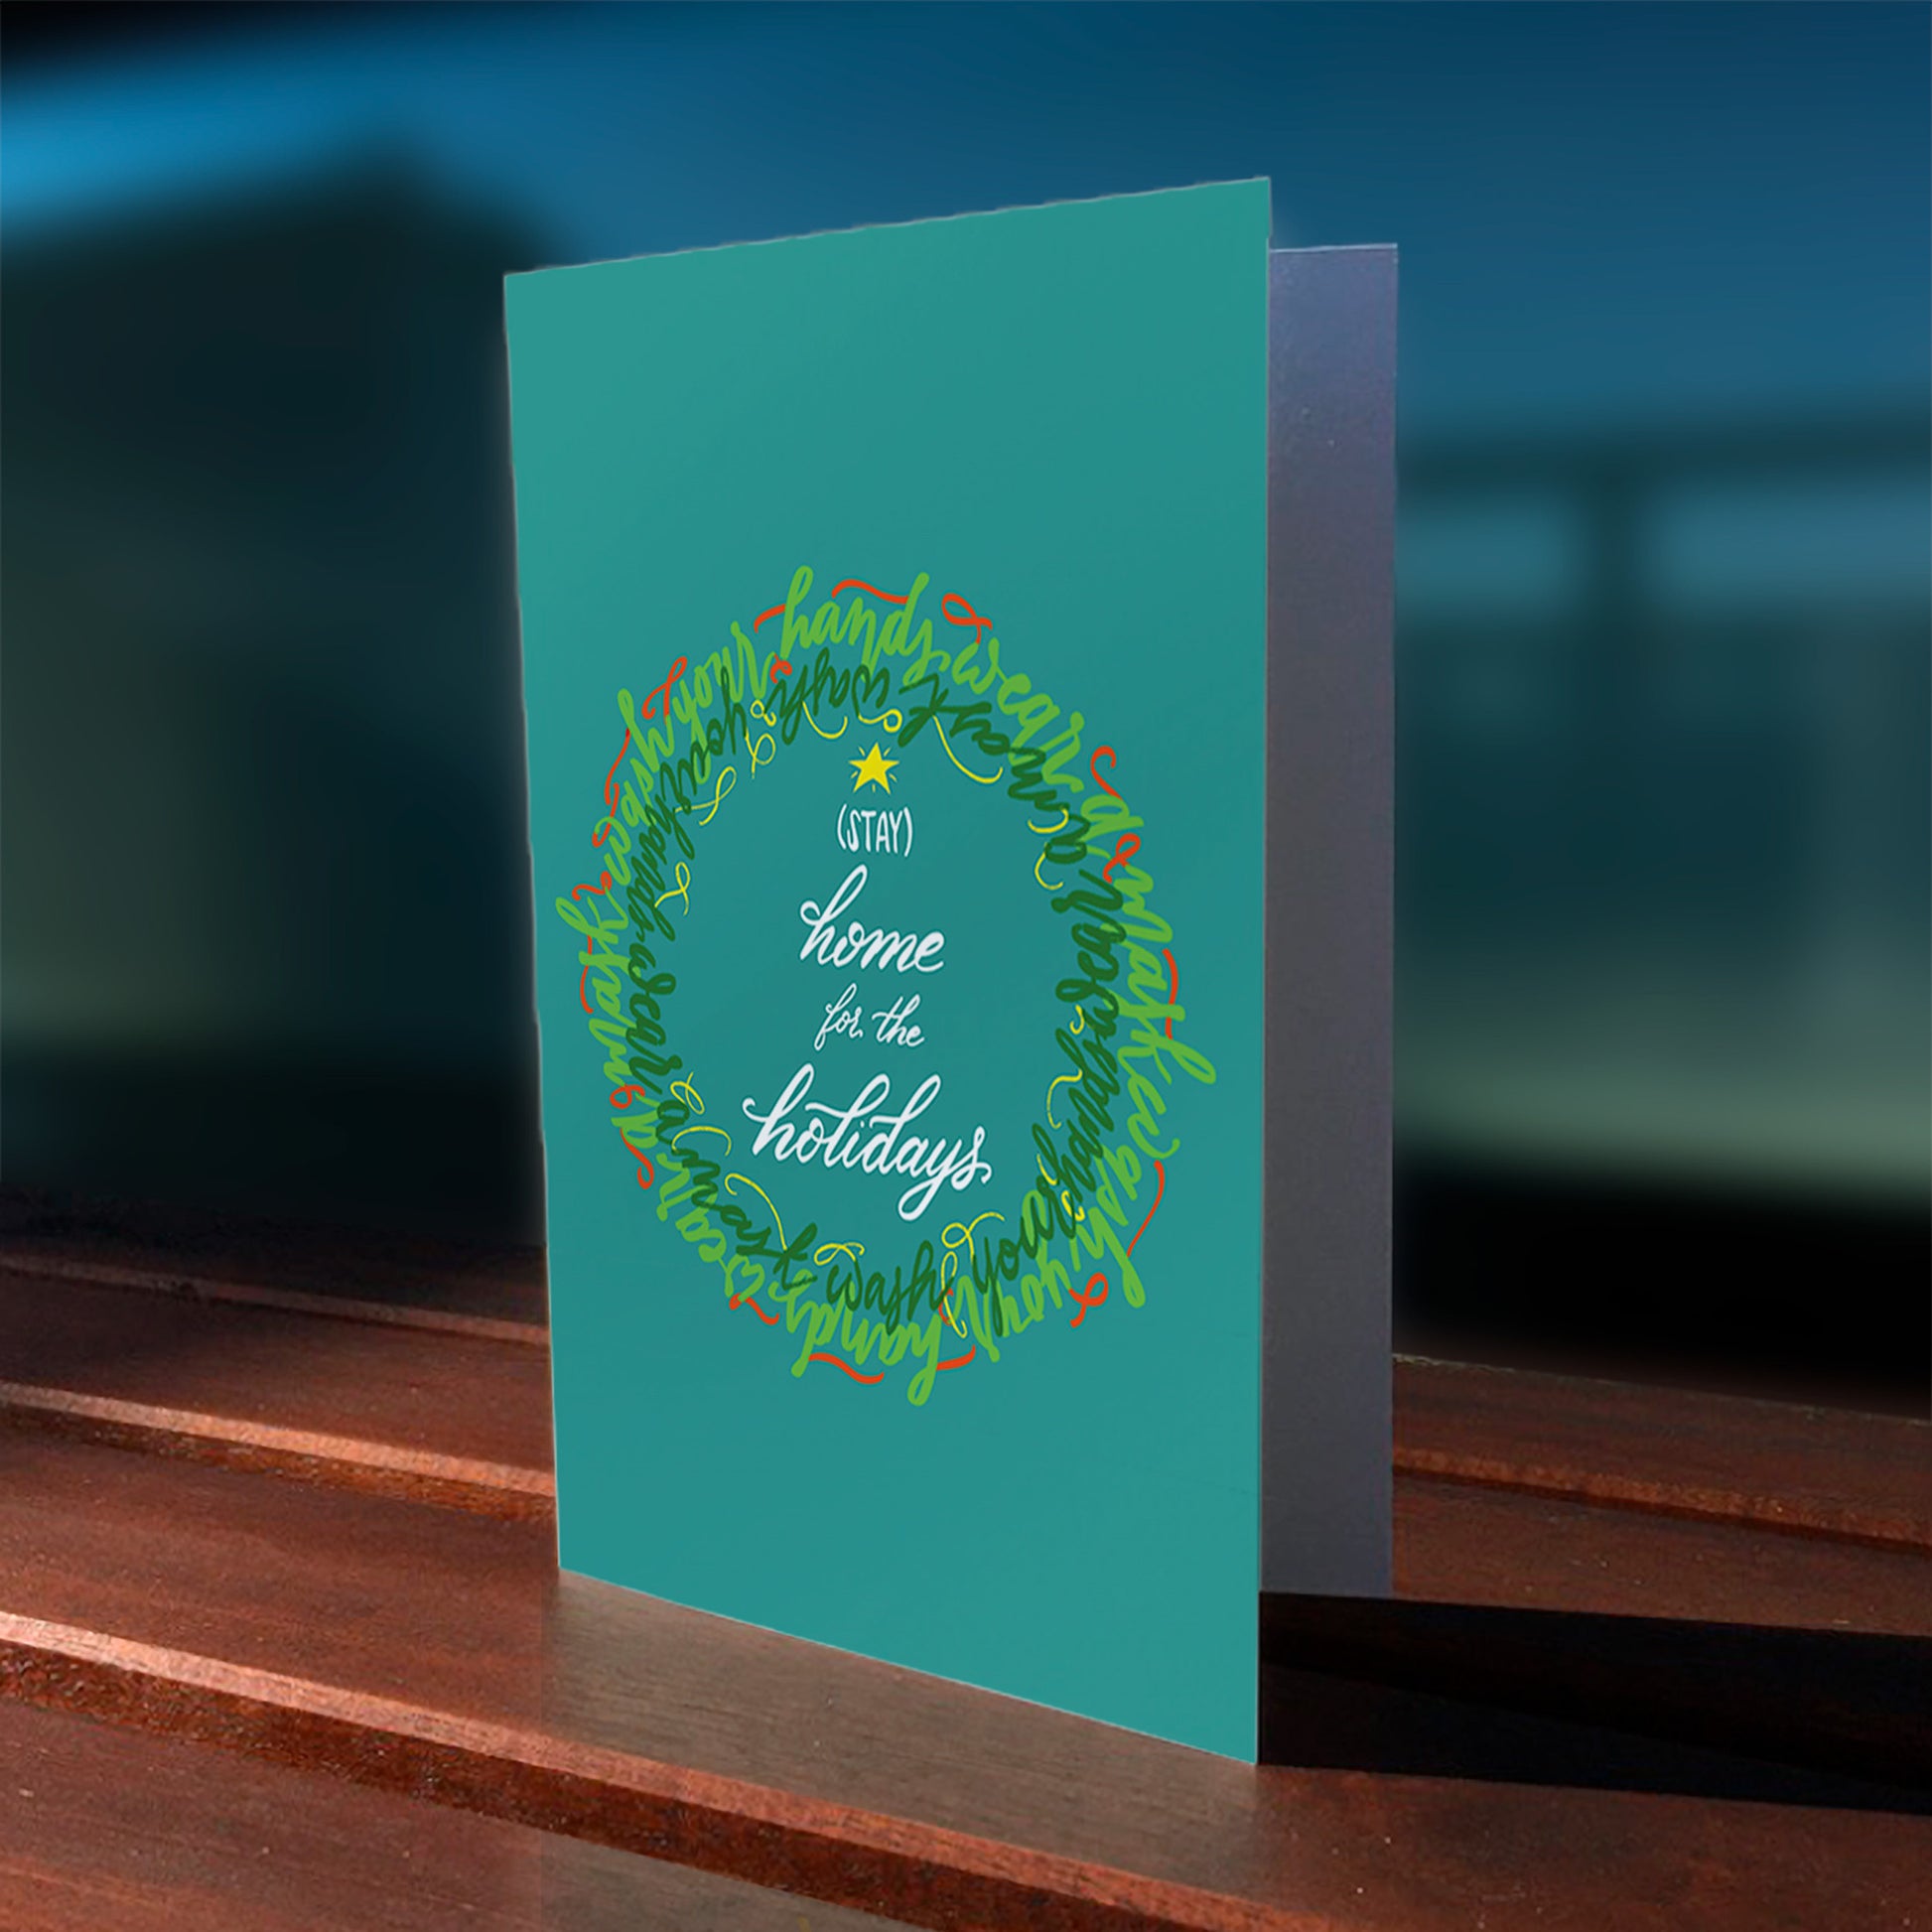 A lifestyle view of the greeting card: "Stay home for the holidays!"